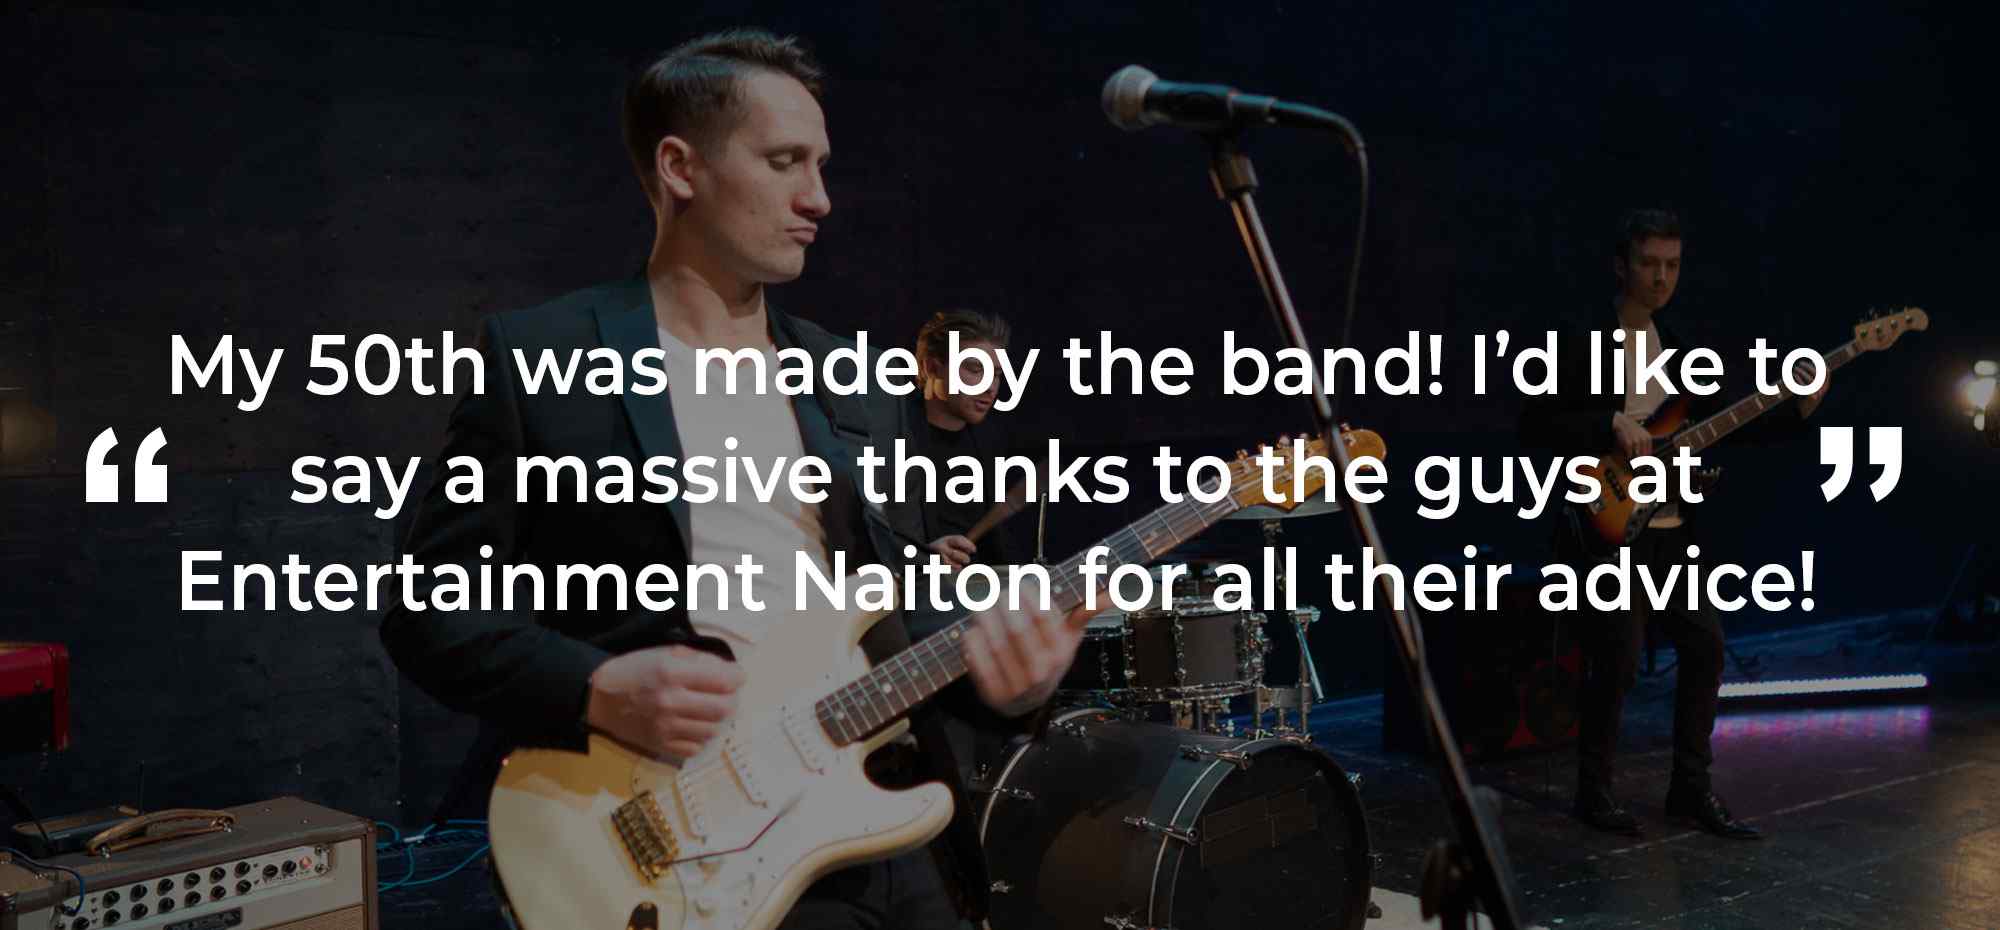 Client Review of a Party Band North Scotland